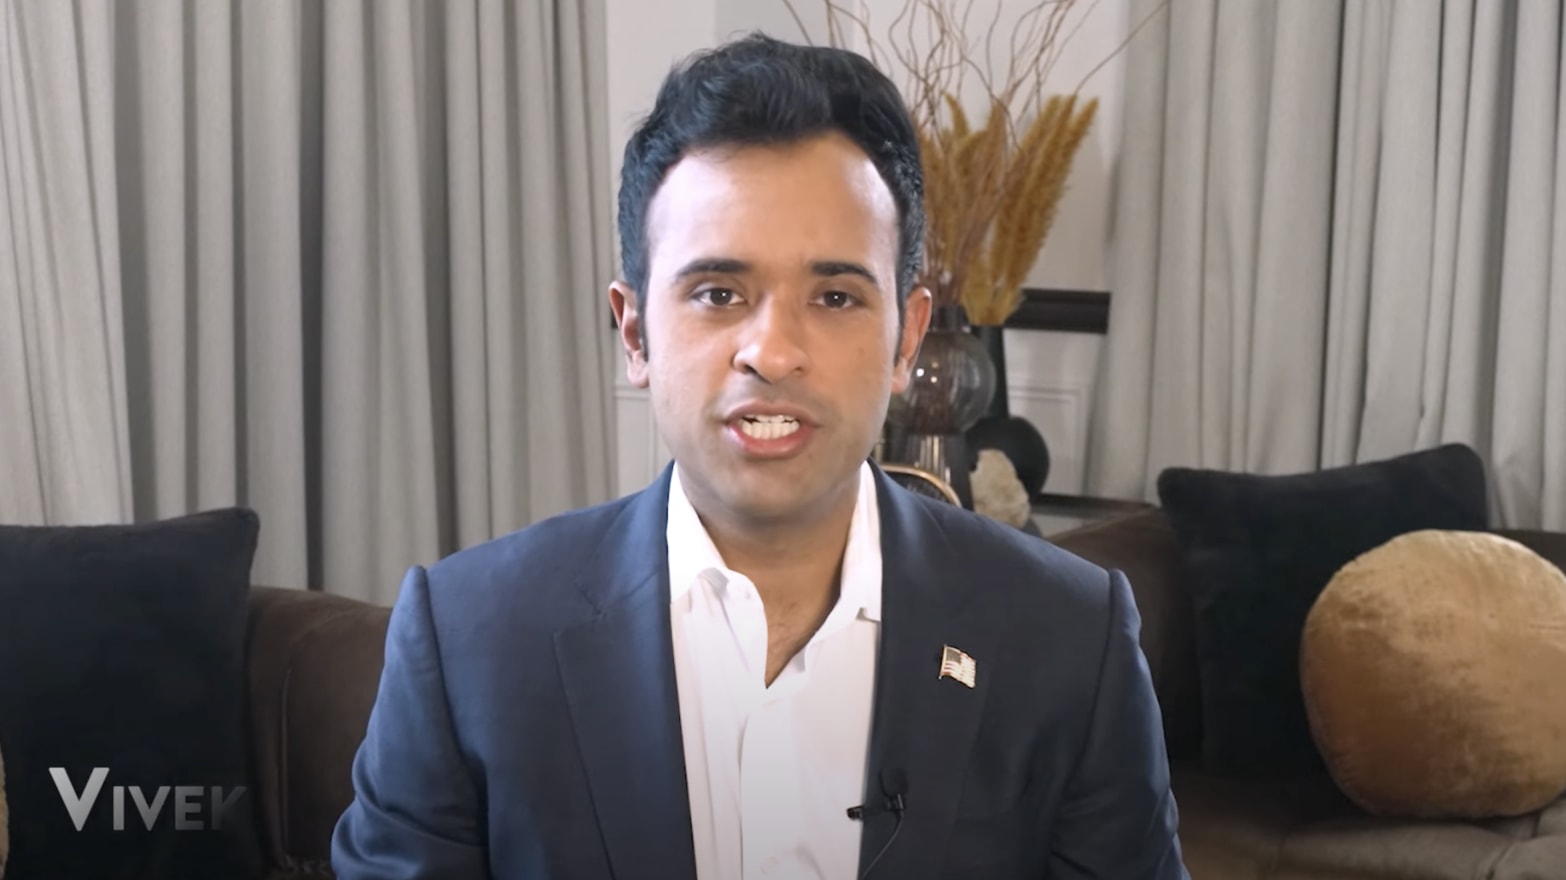 Vivek Ramaswamy urges voters in an ad to turn off a CNN debate in Iowa after being excluded.